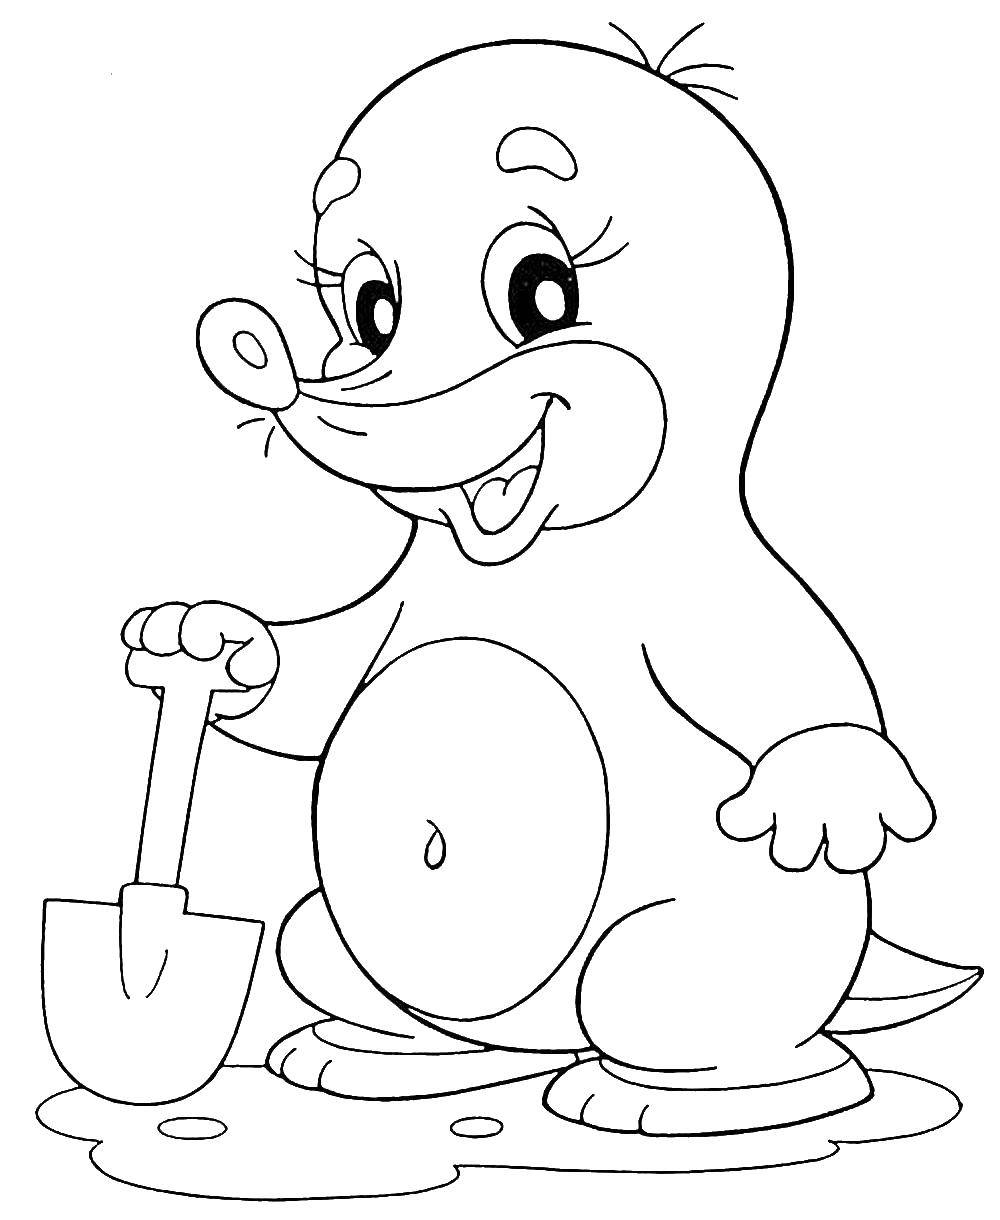 Coloring A mole with a shovel. Category Coloring pages for kids. Tags:  mole.